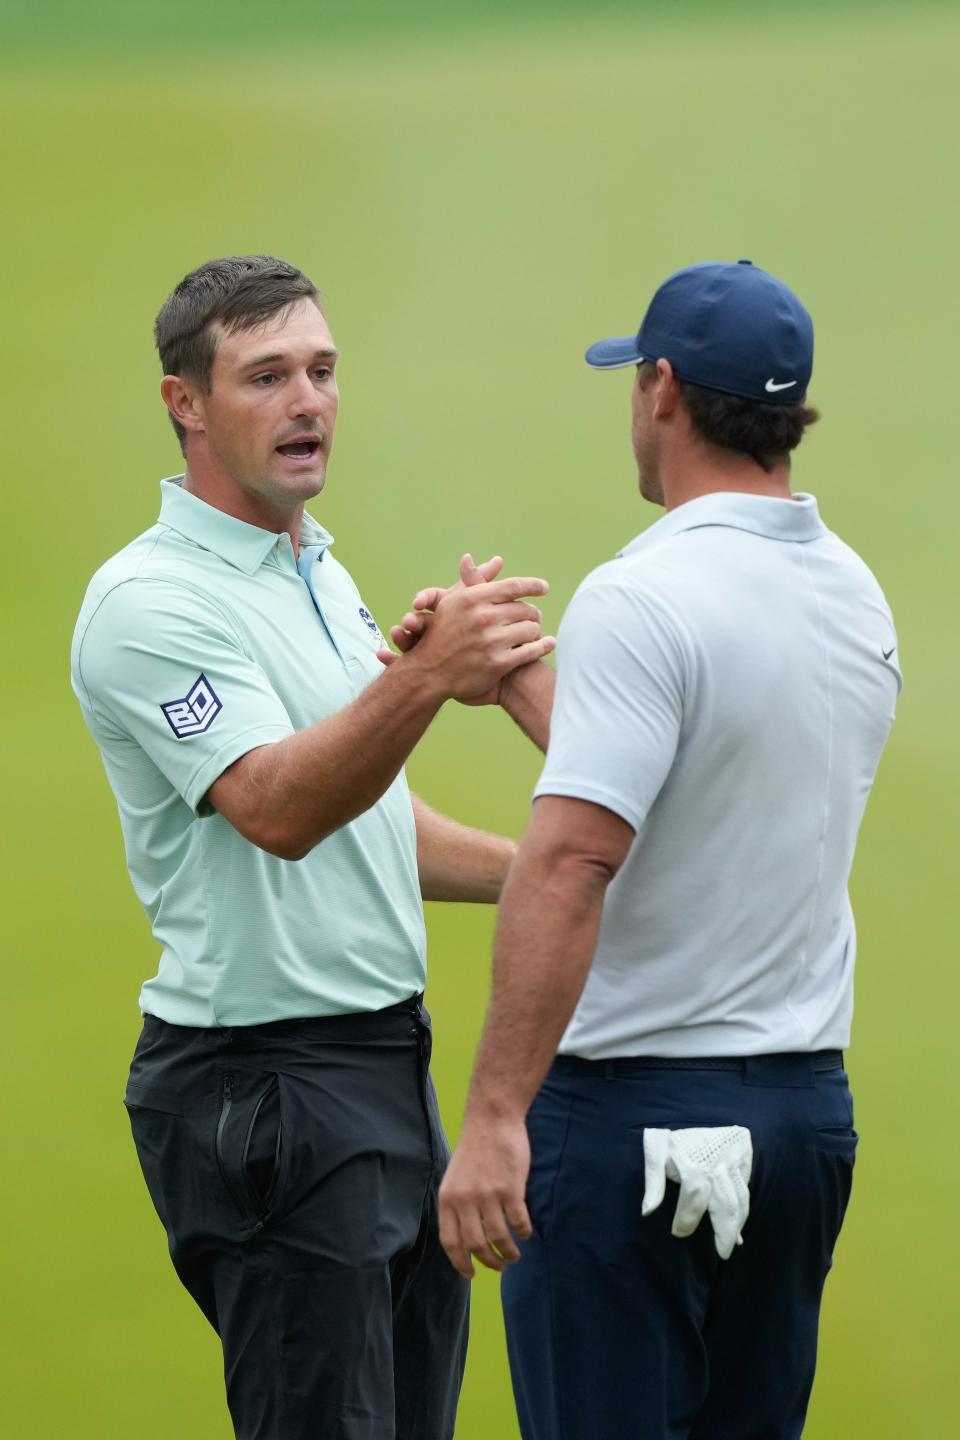 Bryson DeChambeau (left) and Brooks Koepka (right) shake hands on the 18th green during the third round of the PGA Championship.